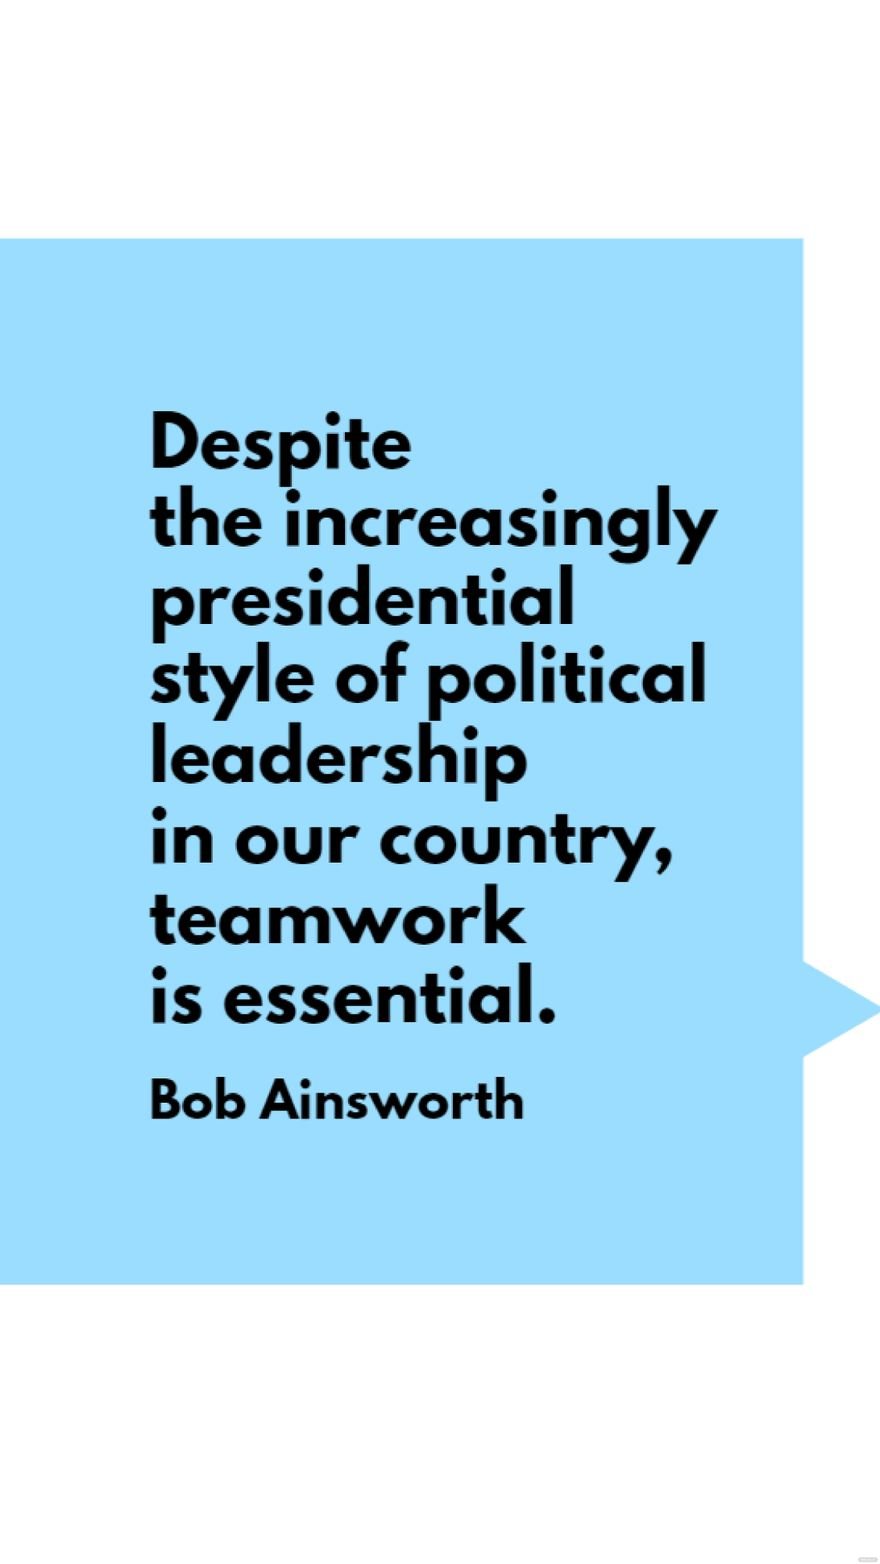 Free Bob Ainsworth - Despite the increasingly presidential style of political leadership in our country, teamwork is essential.